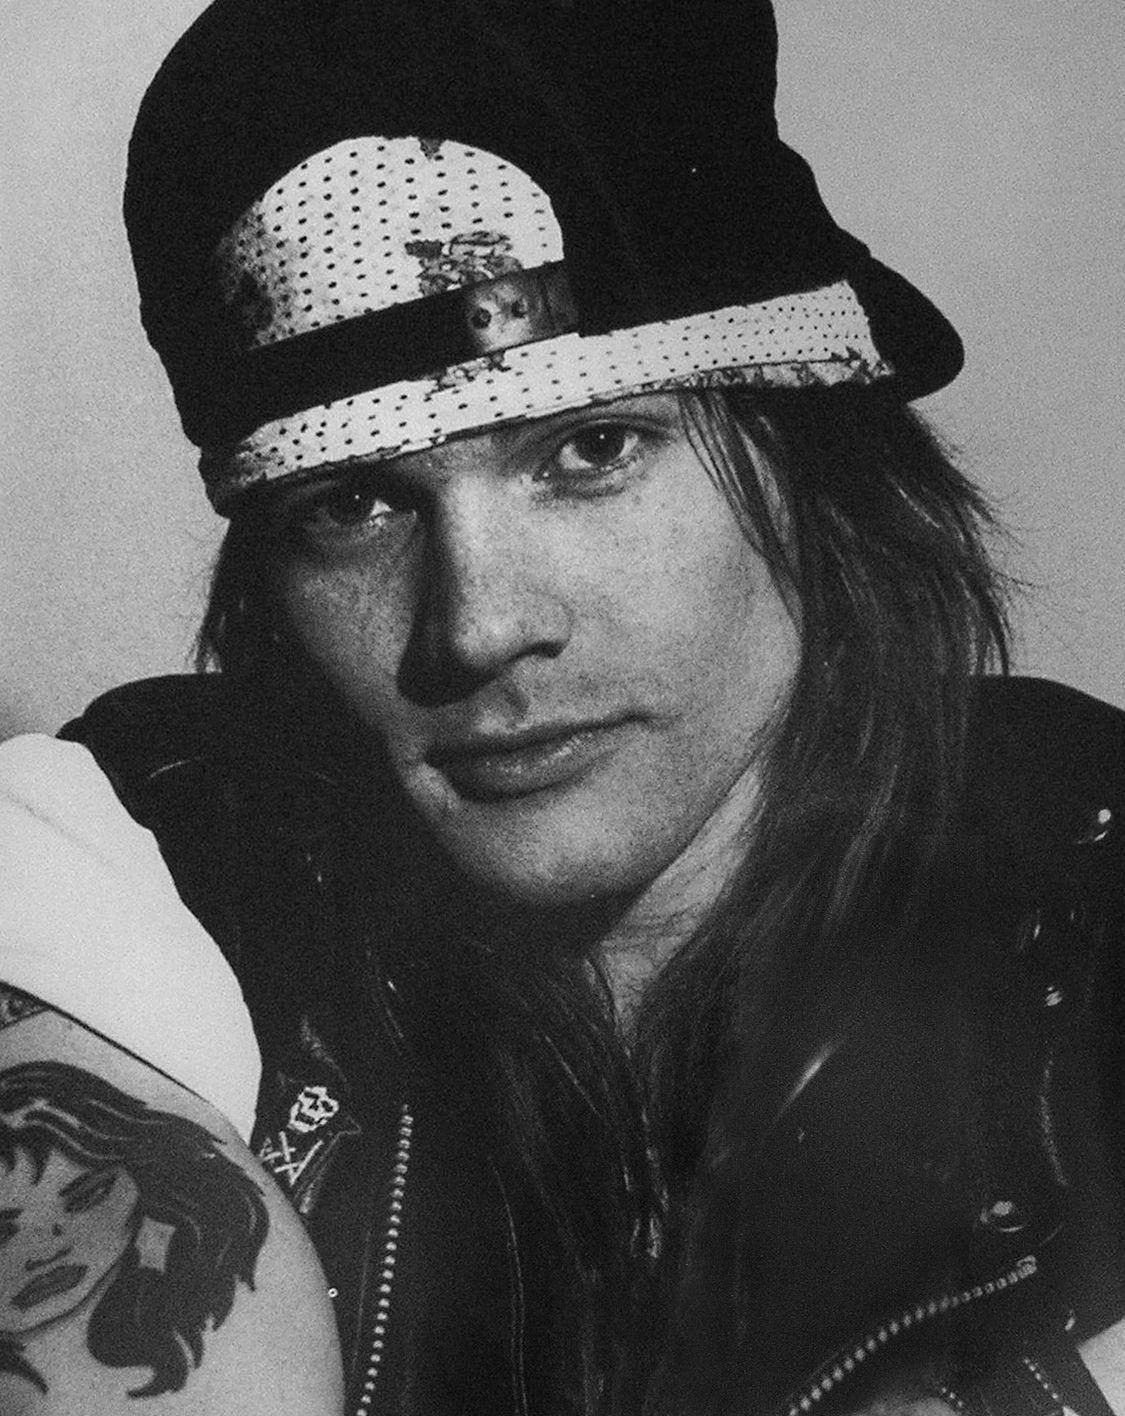 W. Axl Rose Picture HD Wallpaper Picture. Top Celebrities Photo